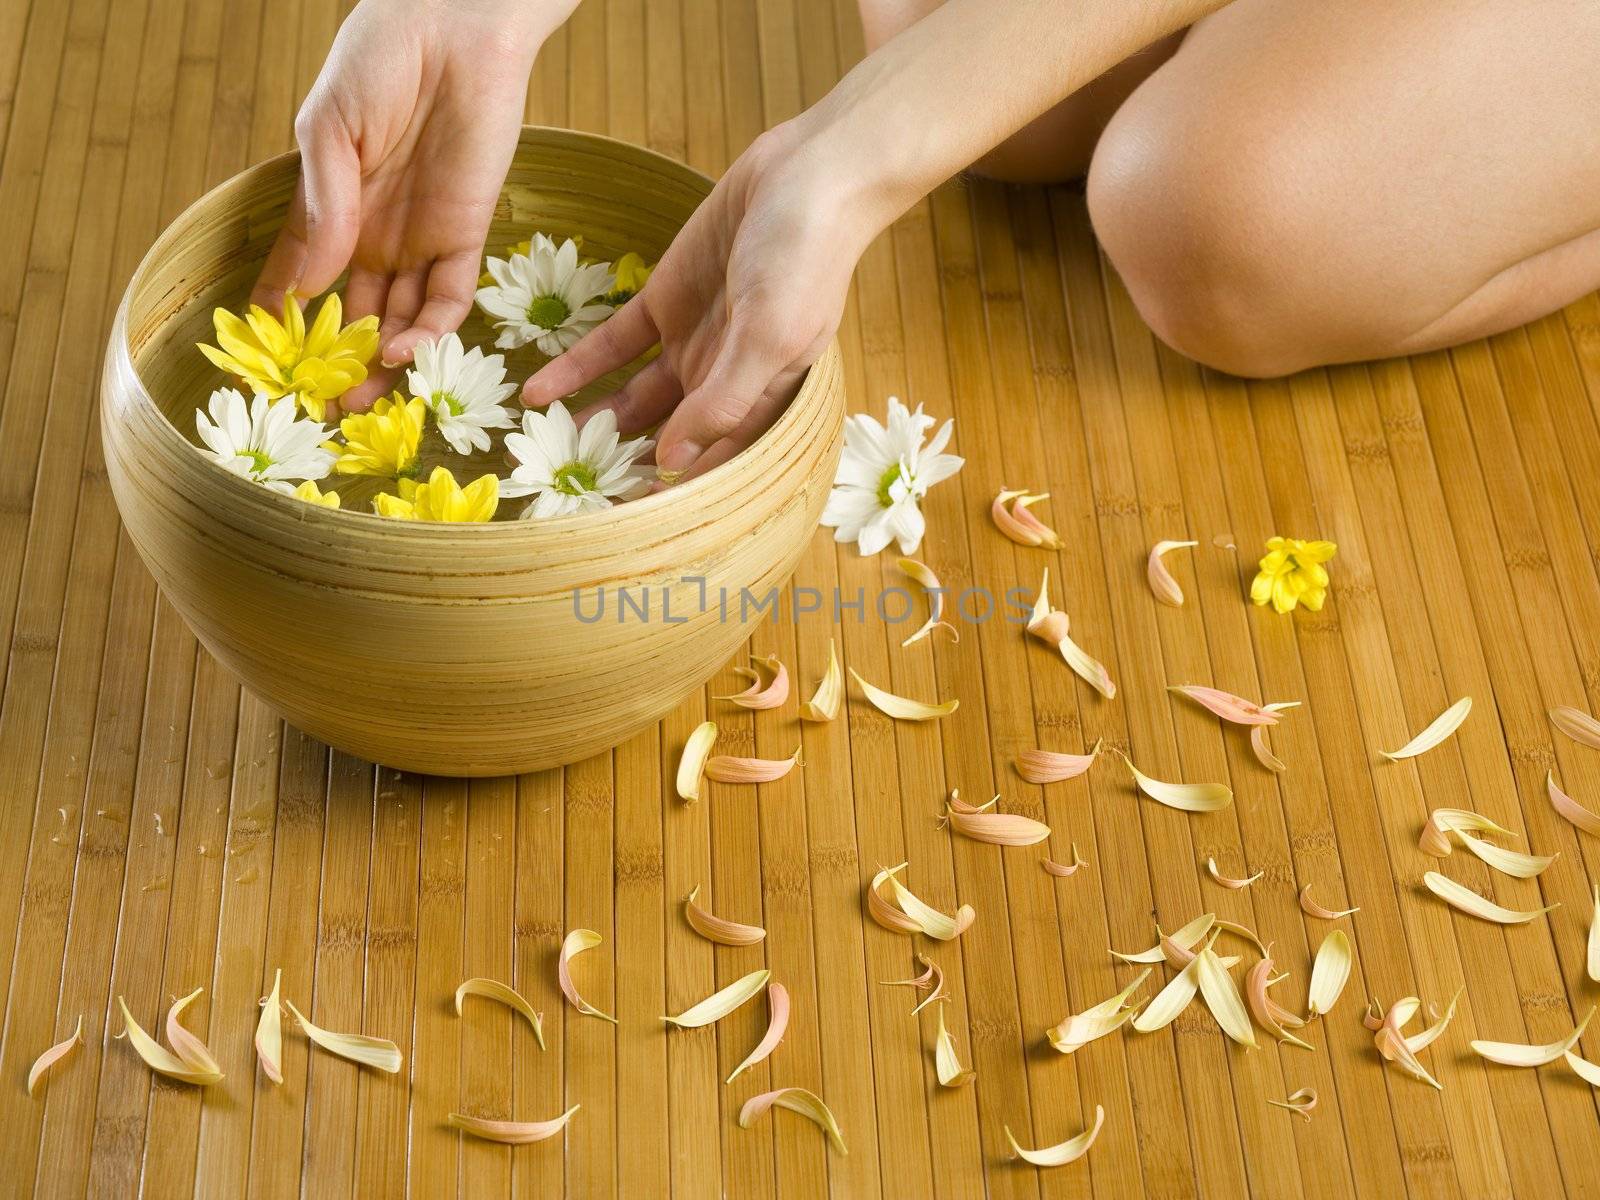 hands near a basin with flowers and water